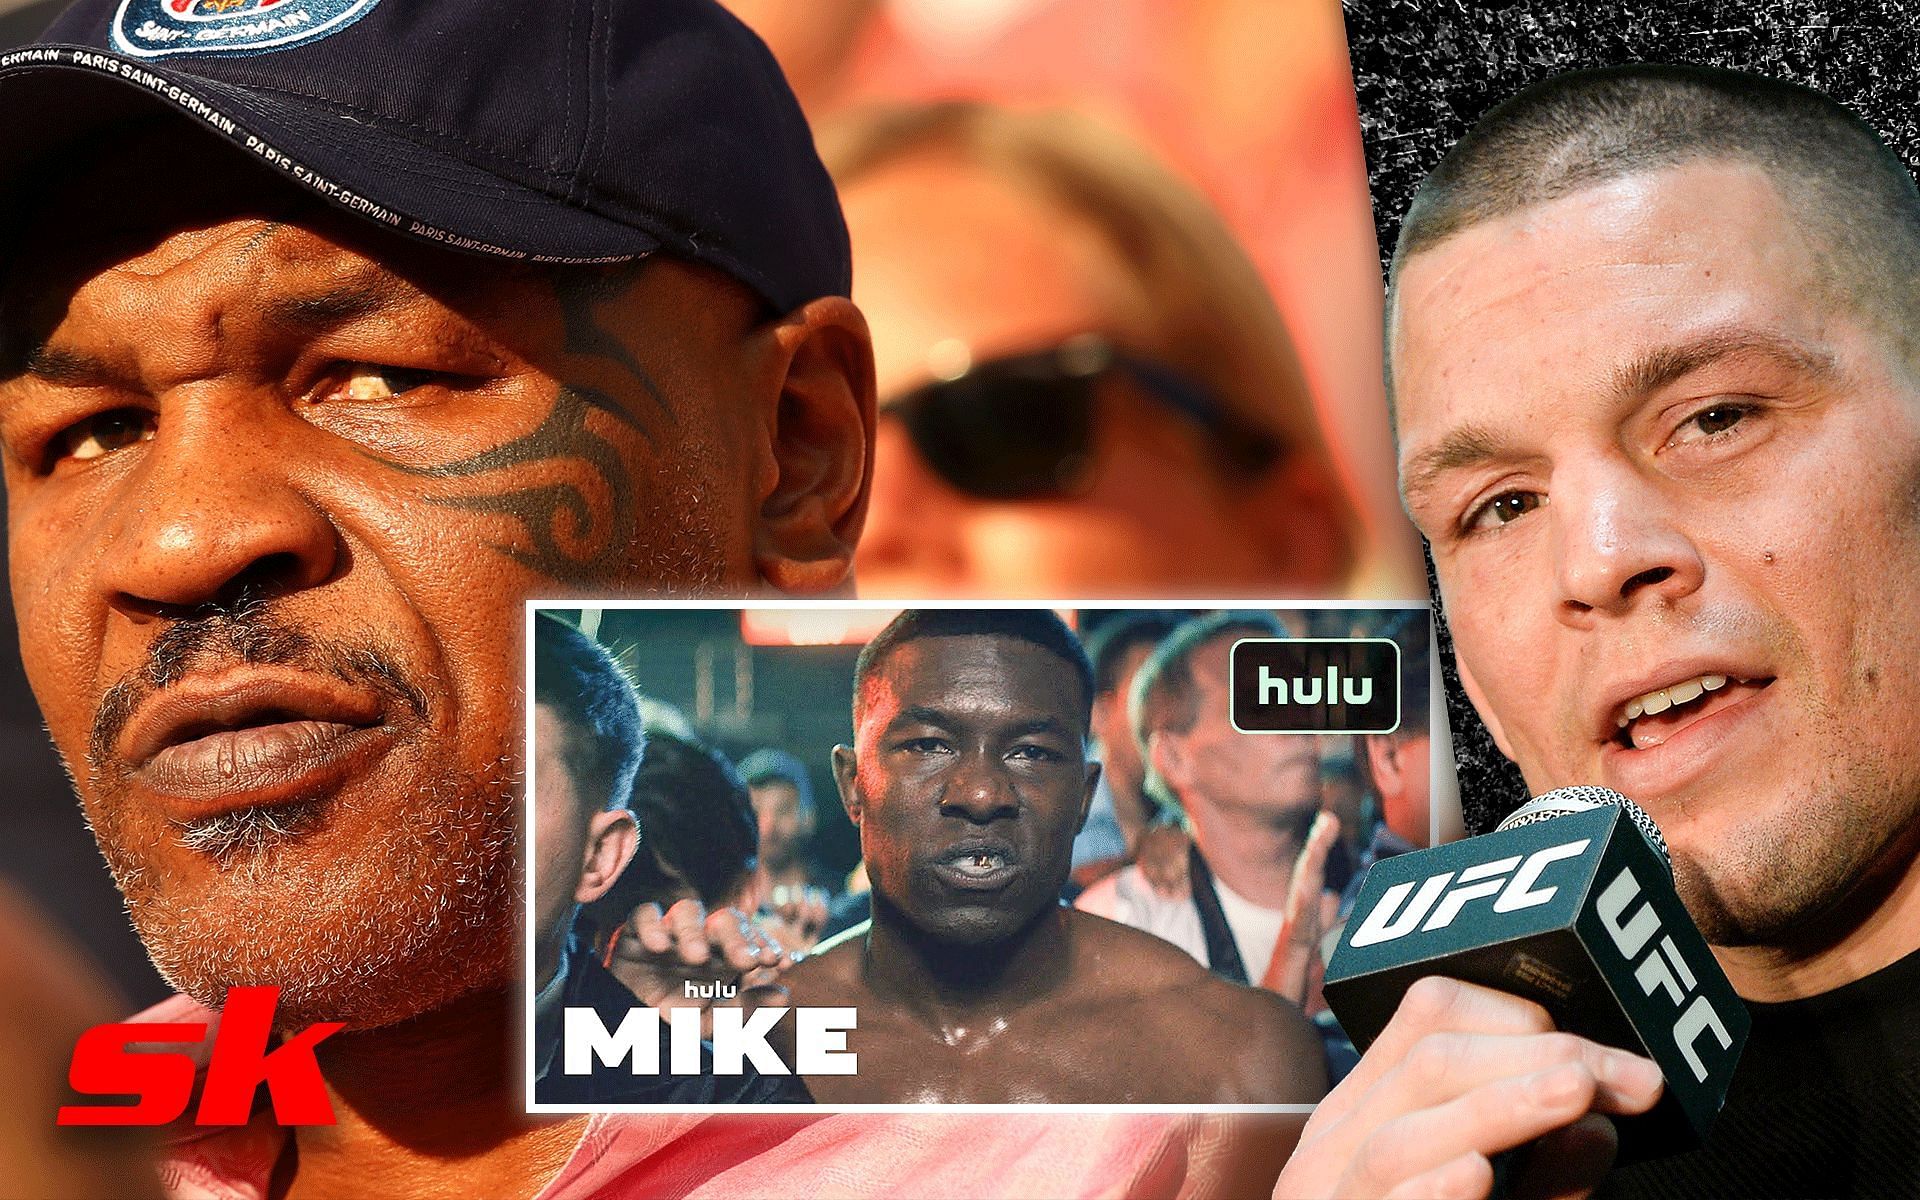 Nate Diaz supports Mike Tyson [Photo credit: Hulu on YouTube]